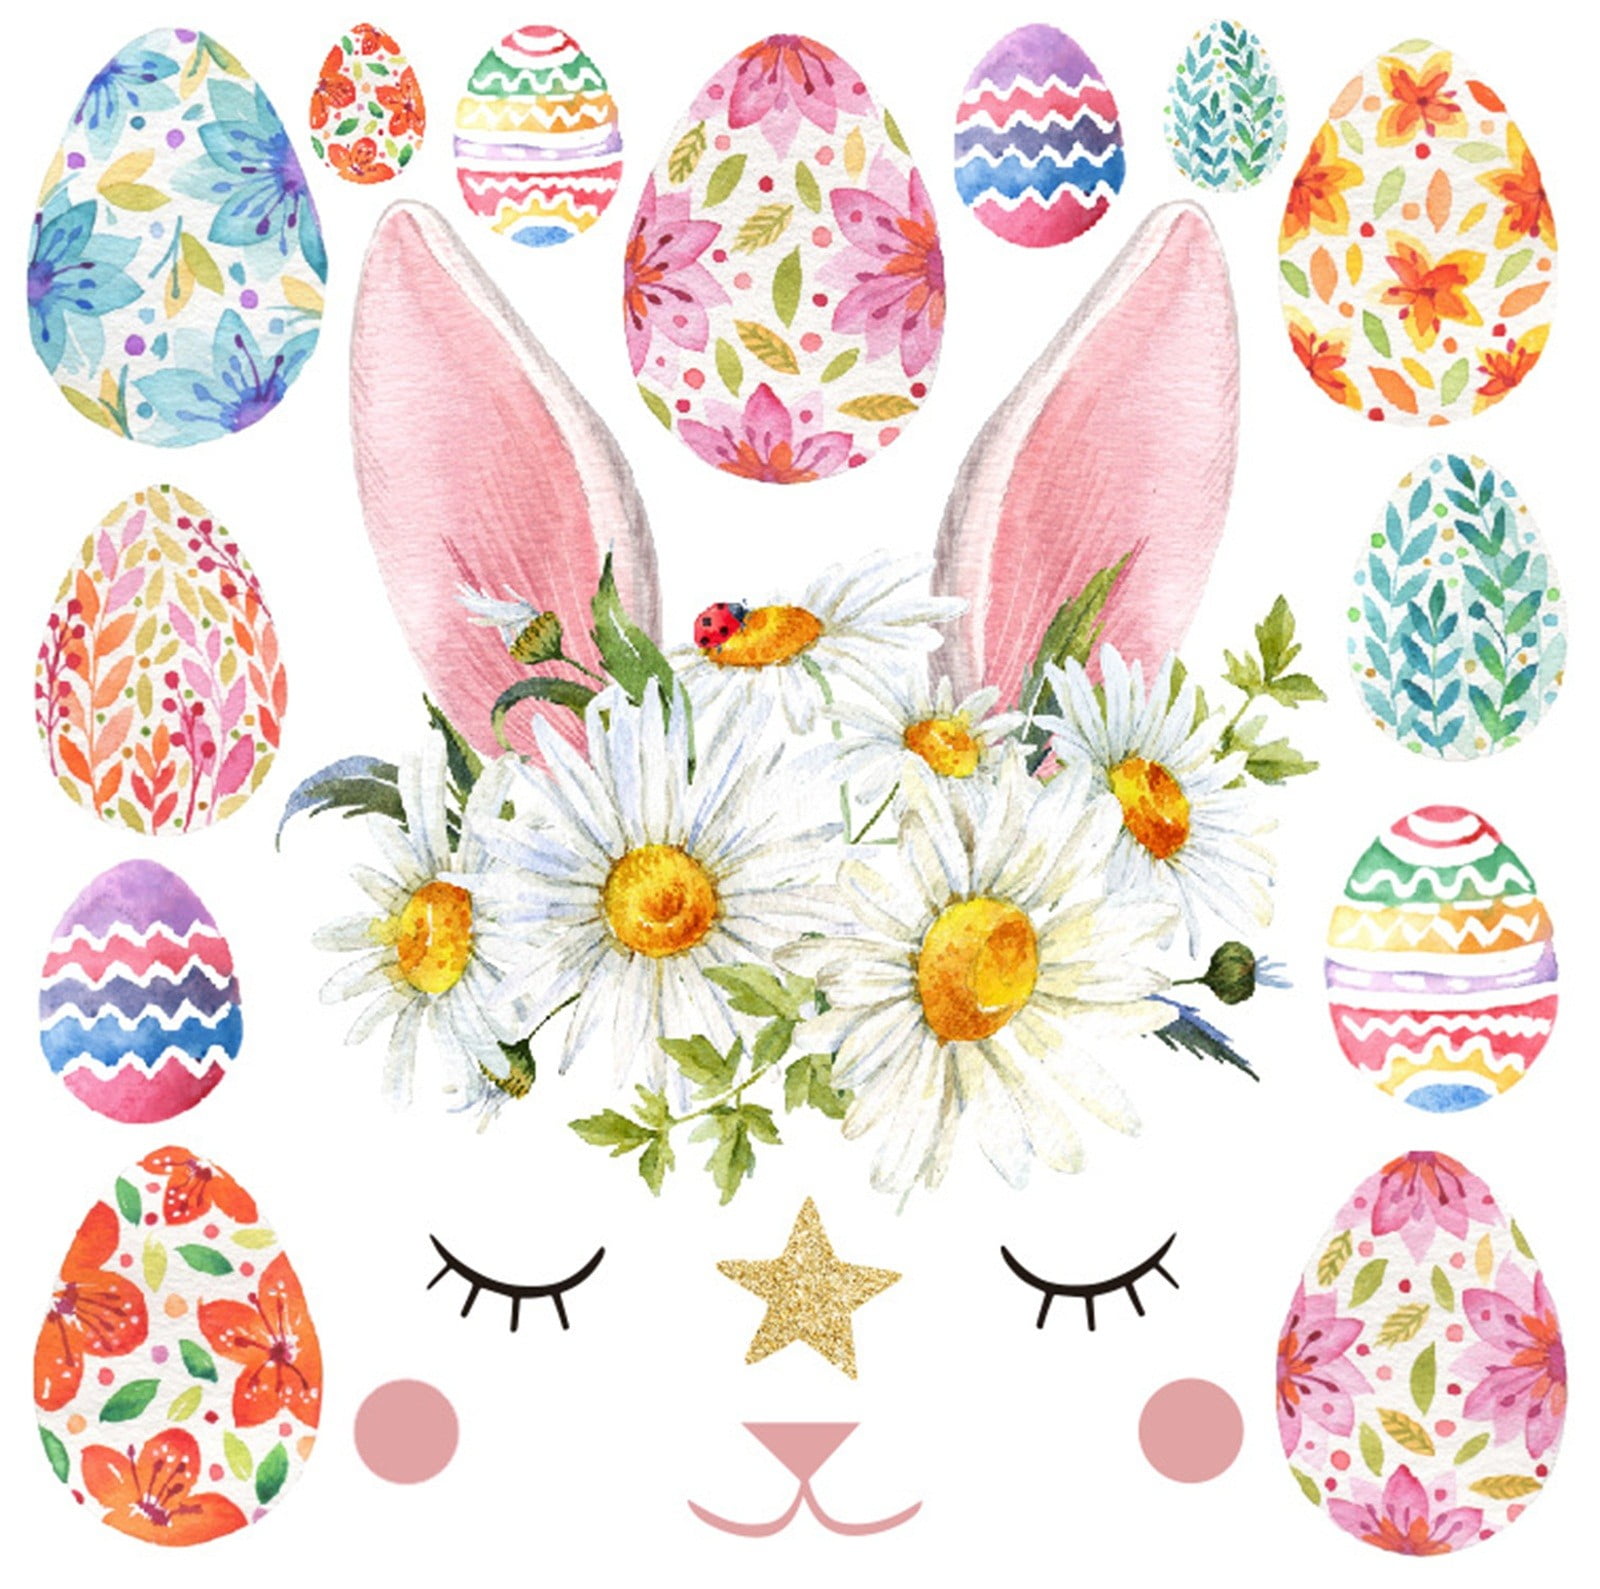 and More Baby Chicks Colorful Eggs Spring Flowers Over 50 Pieces Includes White Bunnies Window Gel Clings Bundle 4 Sheets Easter Decorations Basket 